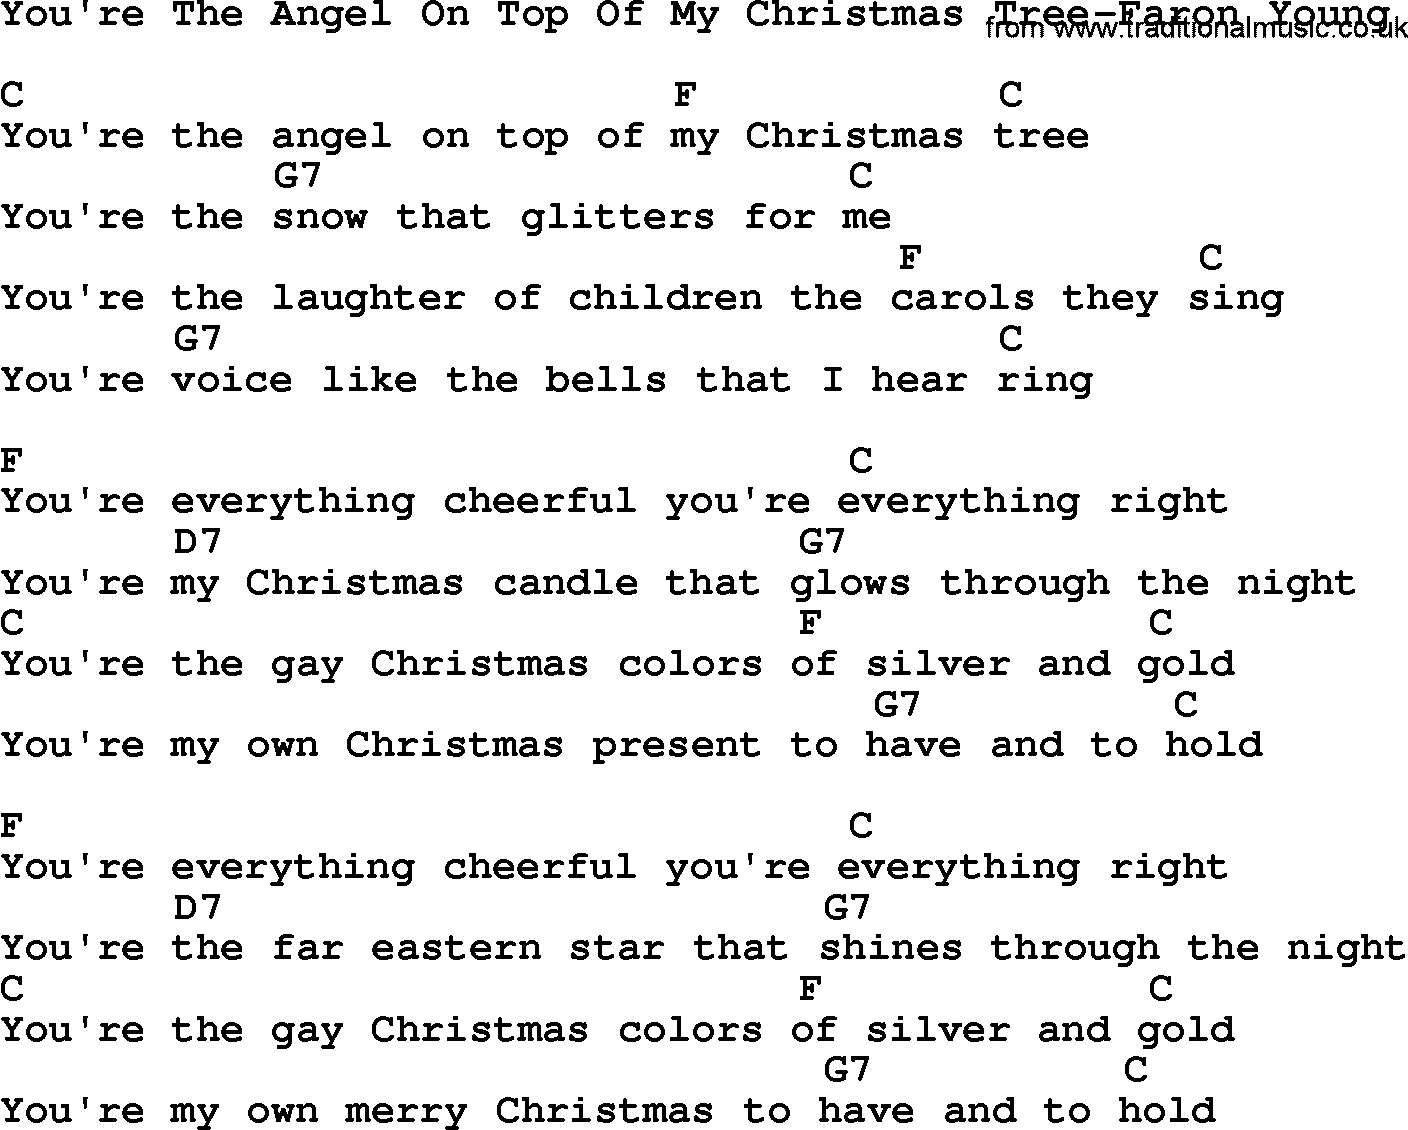 Country music song: You're The Angel On Top Of My Christmas Tree-Faron Young lyrics and chords